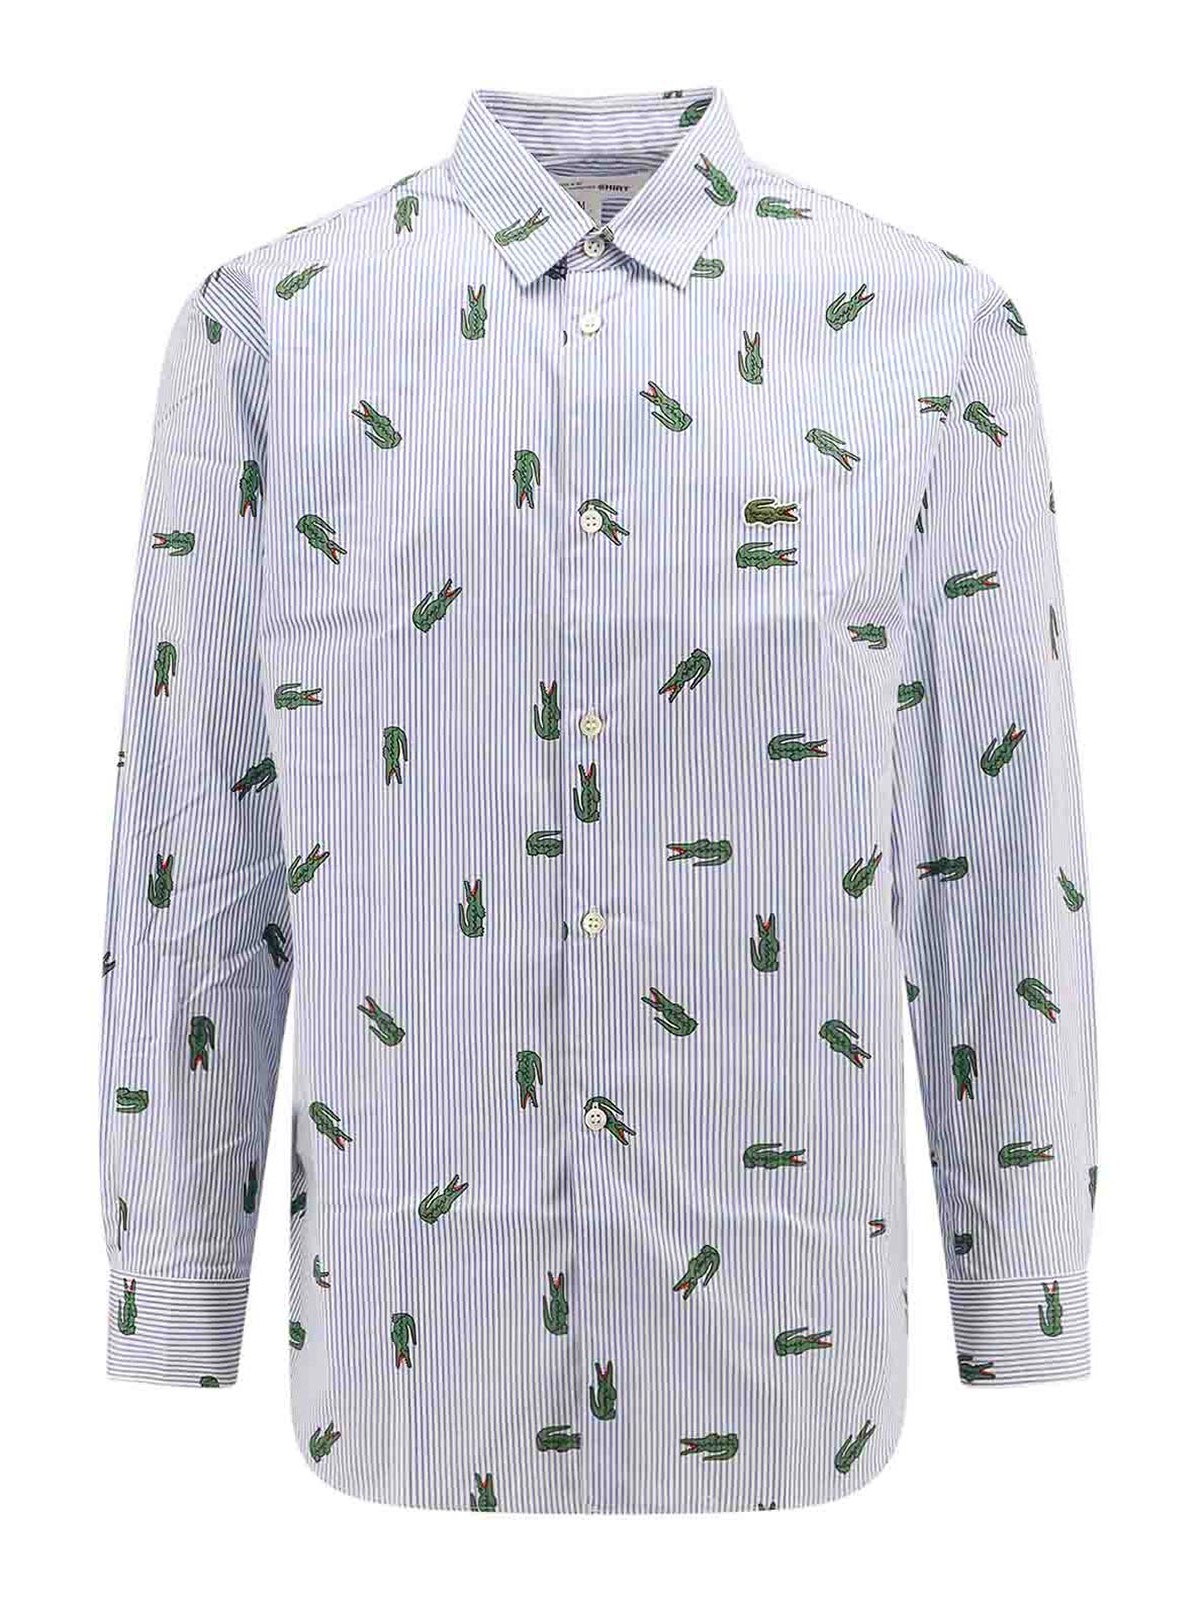 Comme Des Garçons Shirt Cotton Shirt With All-over Lacoste Print In Blue